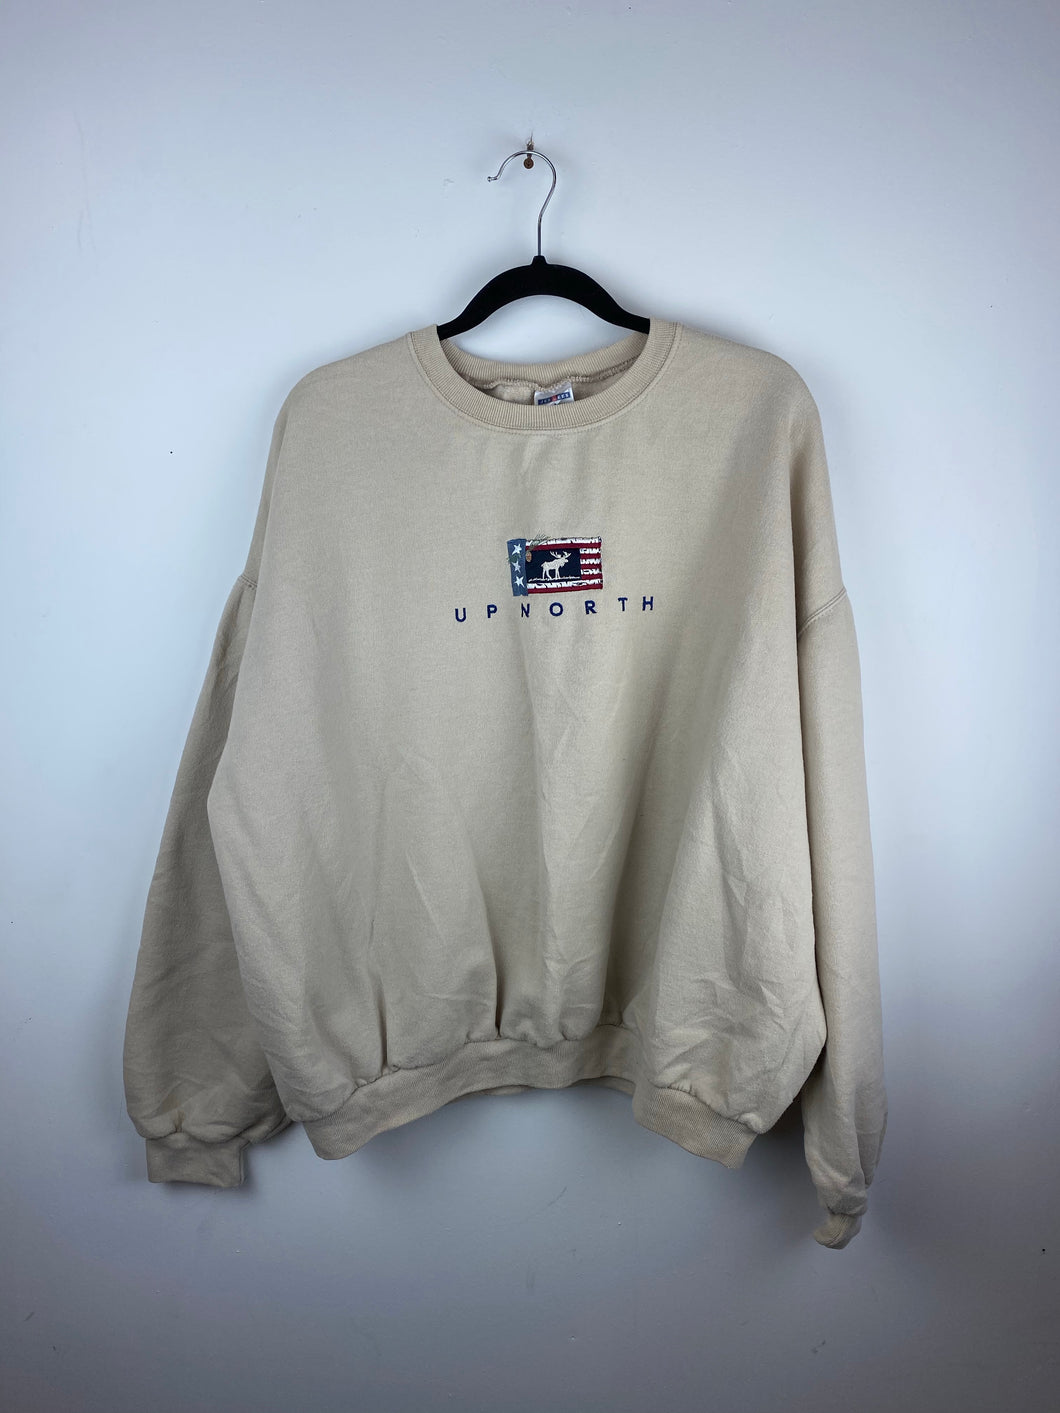 Embroidered Up North crewneck